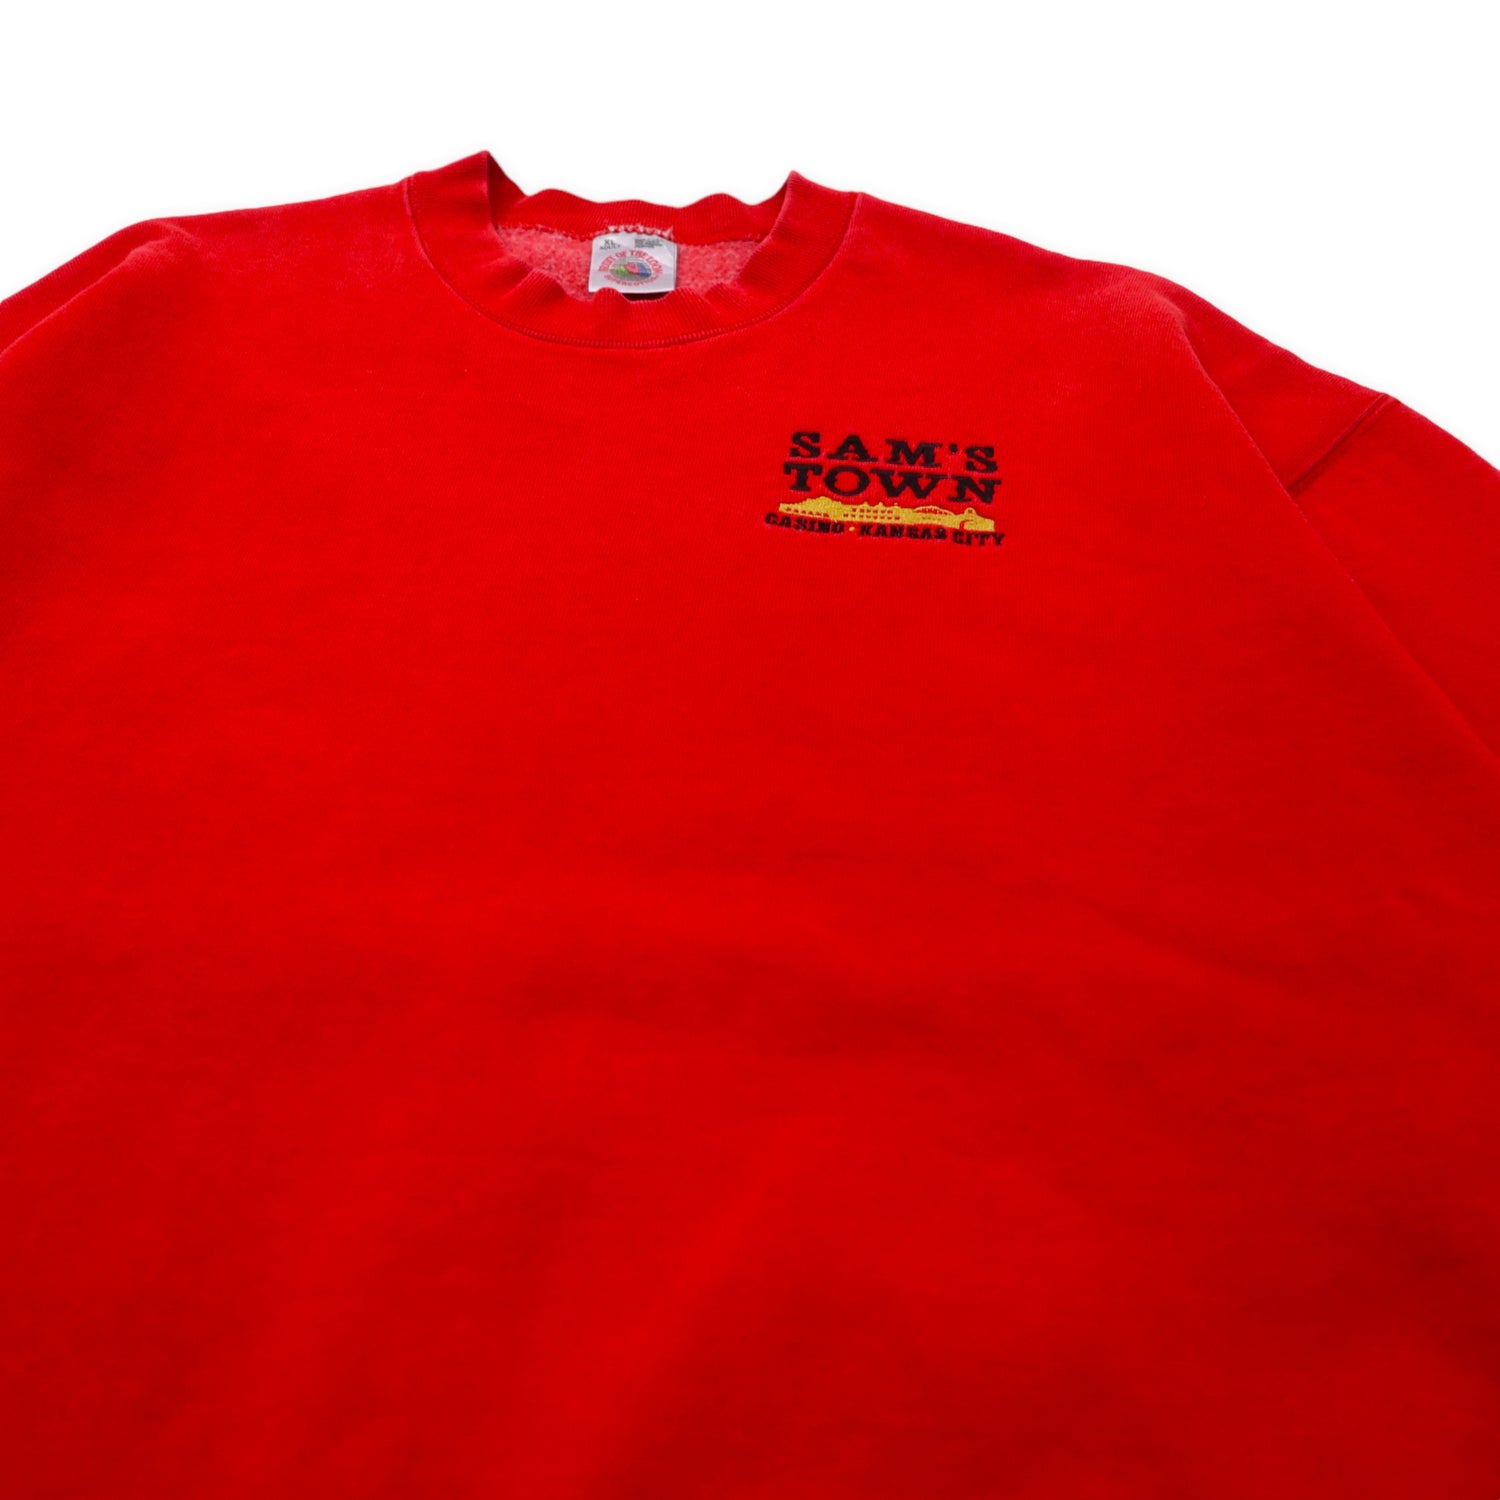 Fruit of the Loom USA Made 90's Sweatshirt XL Red Cotton Brushed 